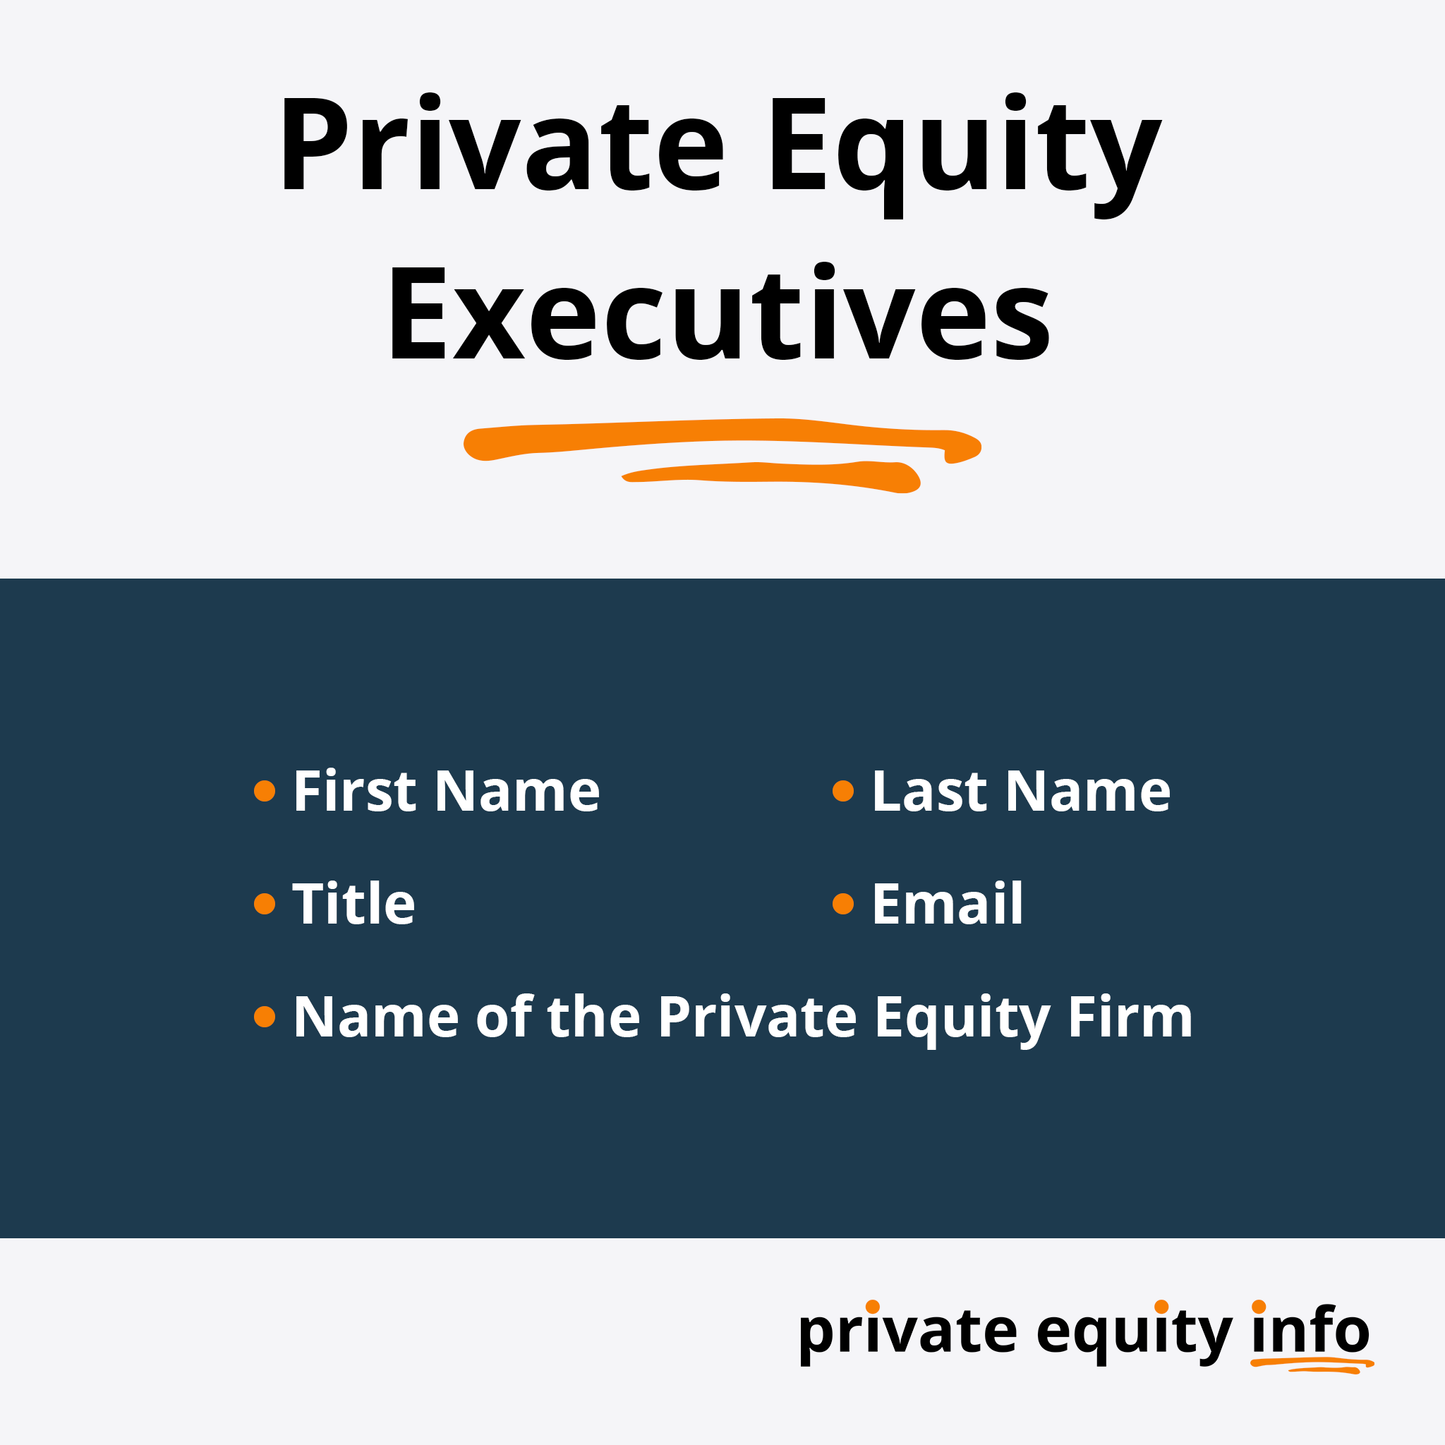 List of Private Equity Firms in the Credit Card industry